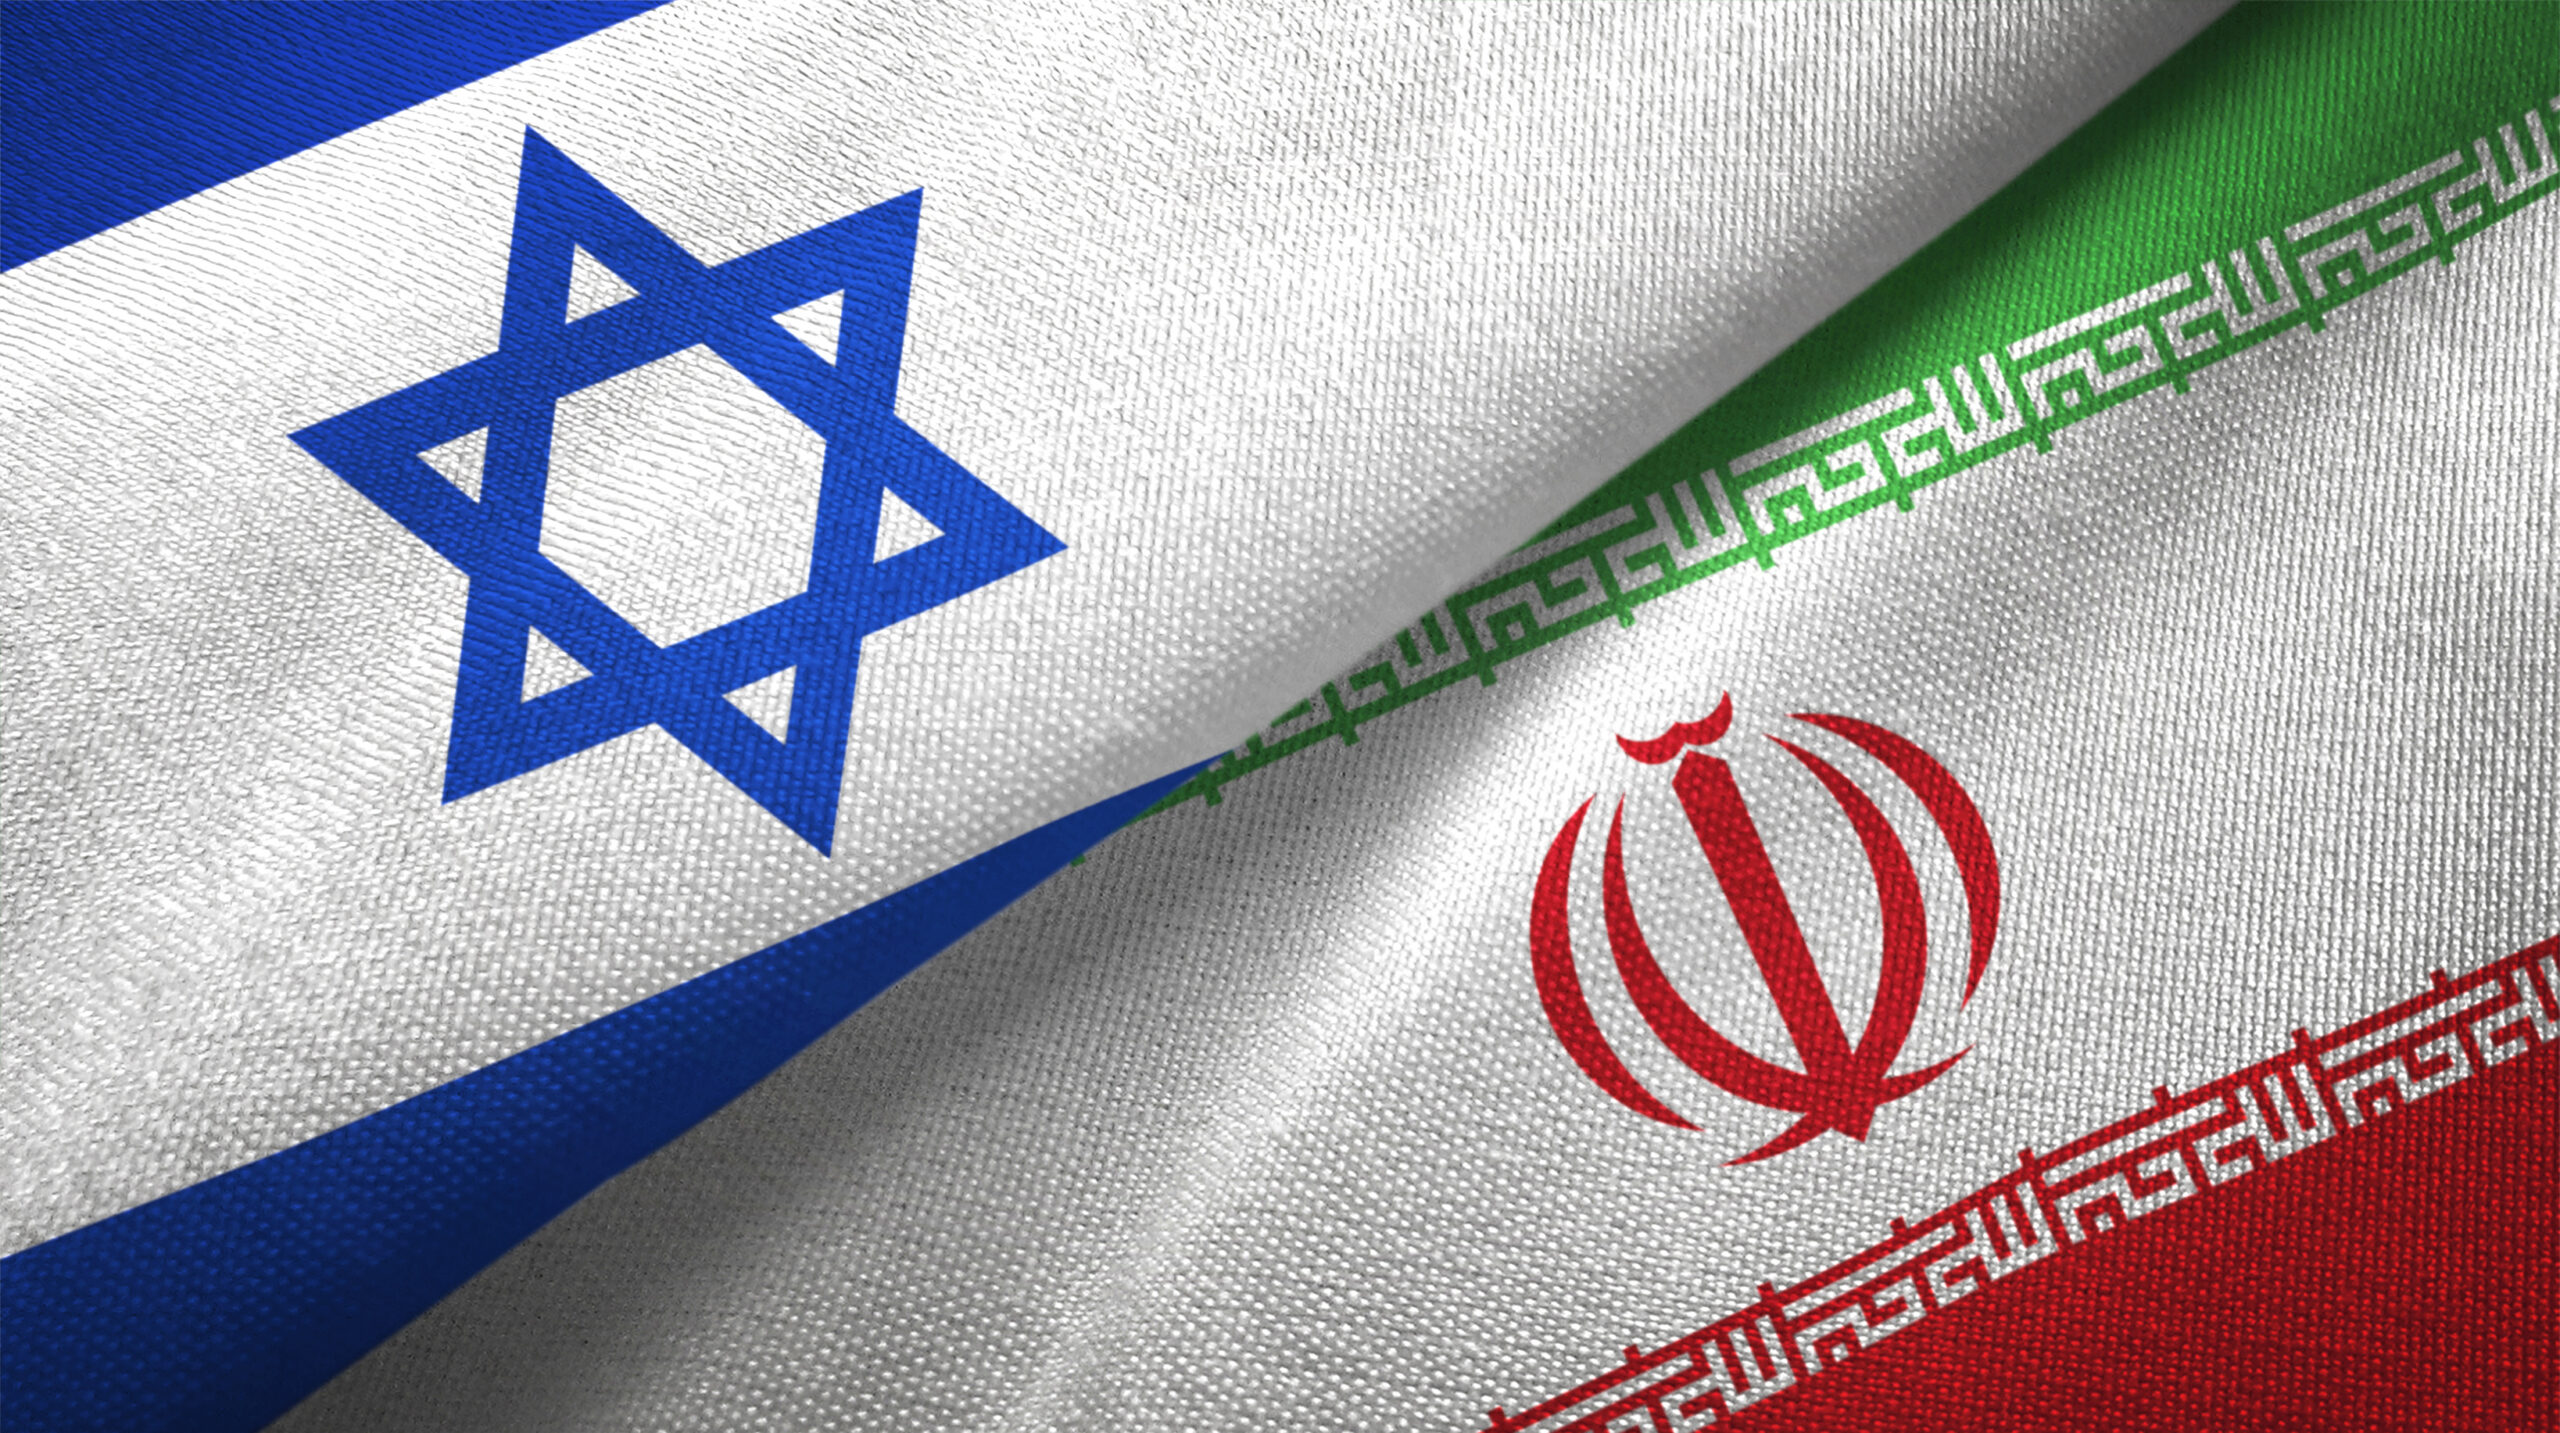 Israel and Iran flags together textile cloth, fabric texture